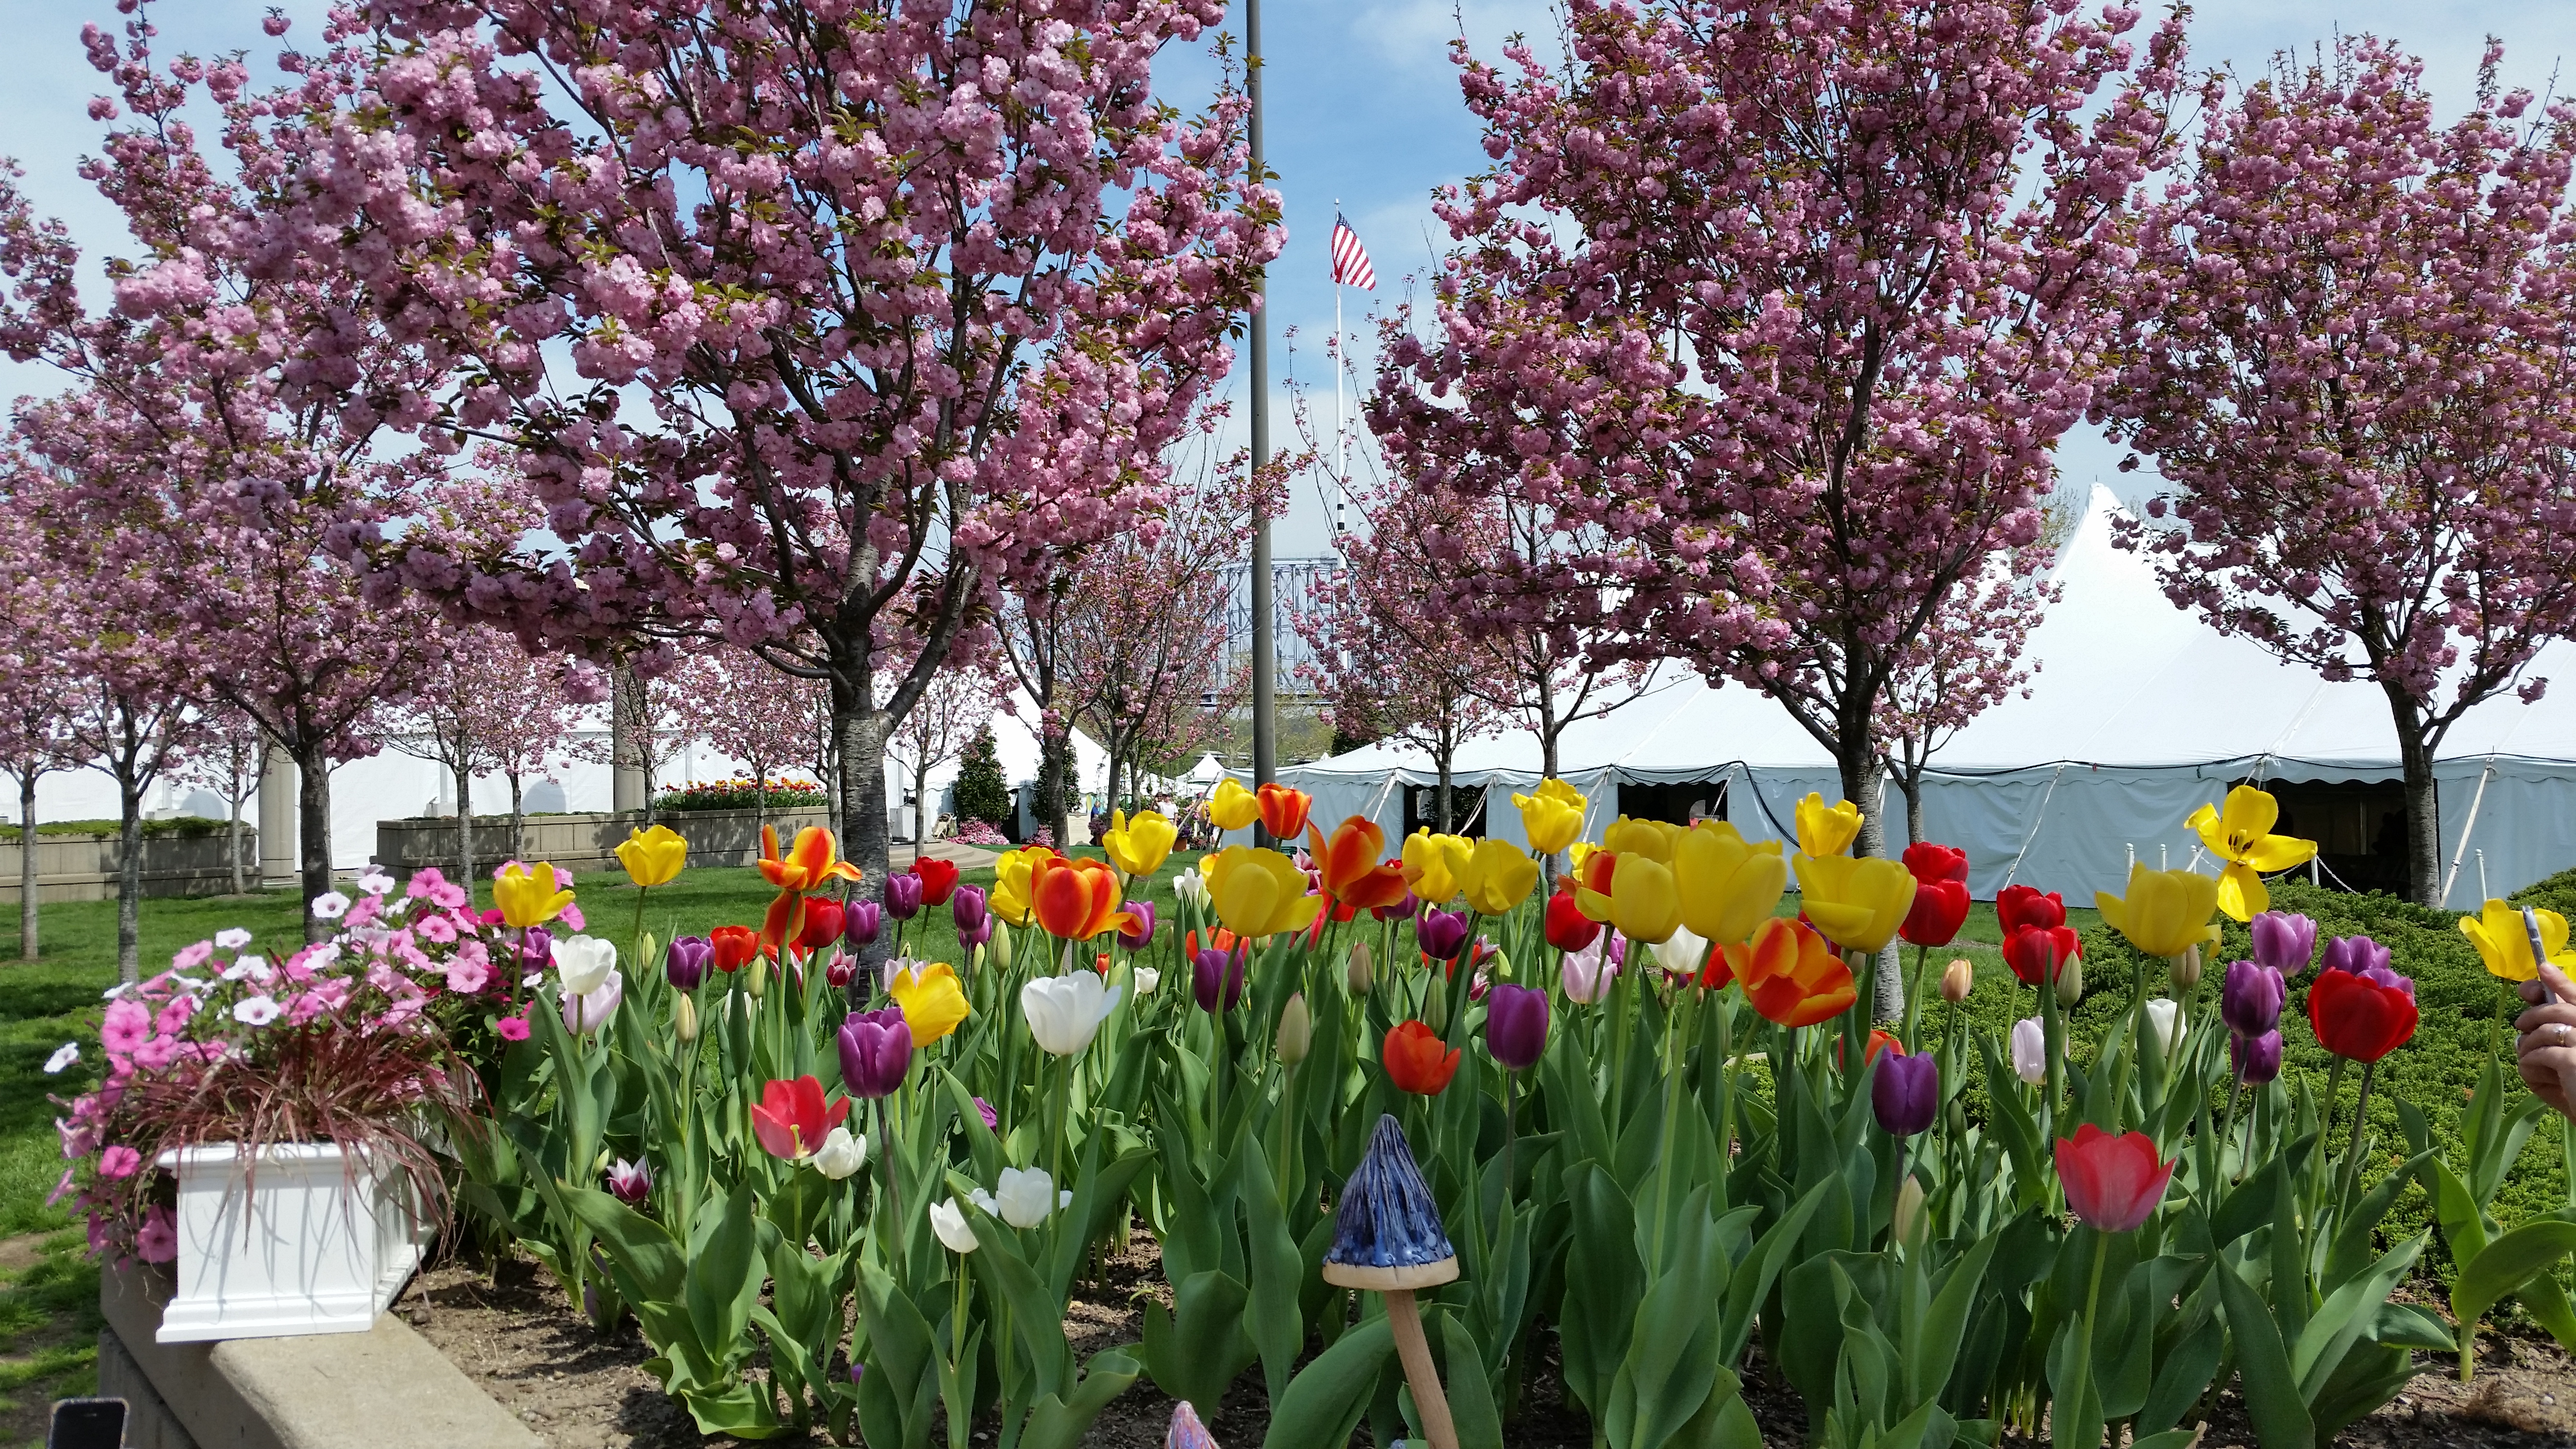 A picture of blooming flowers and trees at the Cincinnati Flower Shower